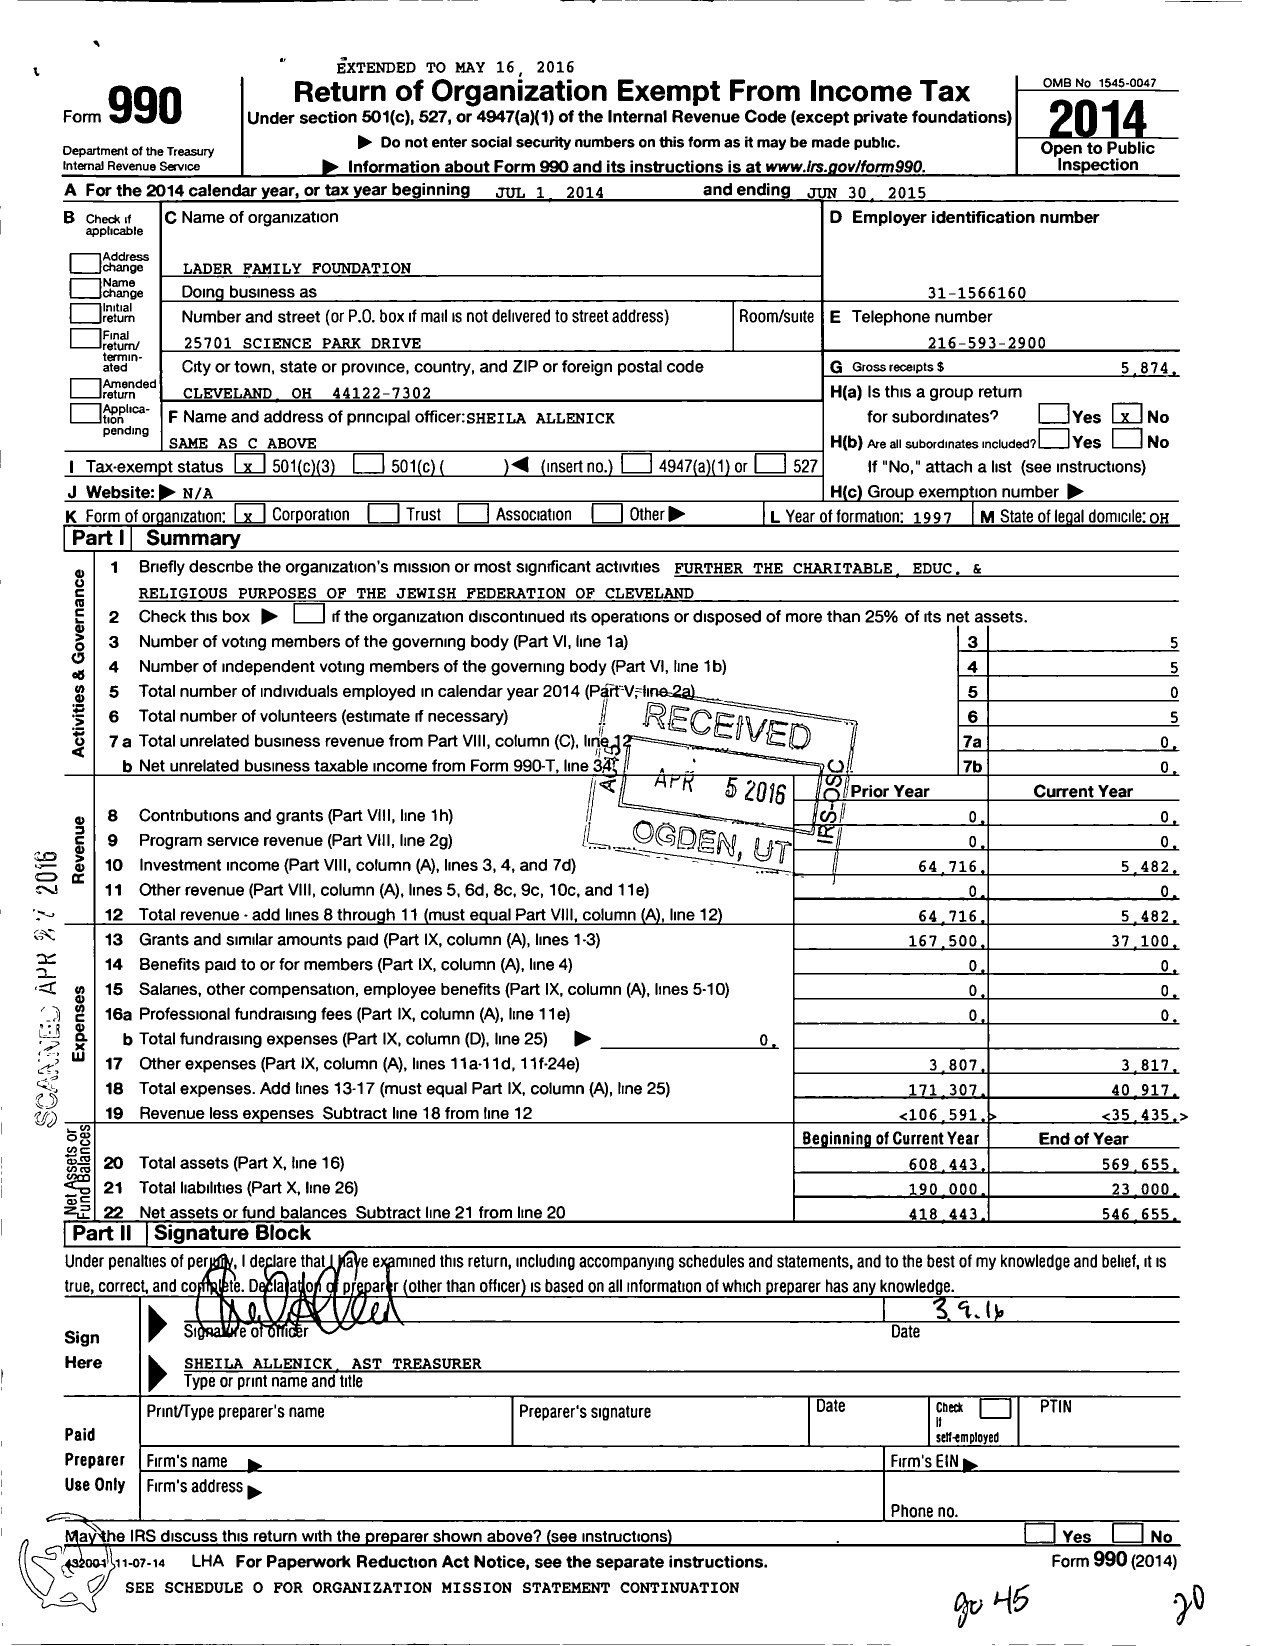 Image of first page of 2014 Form 990 for Lader Family Foundation